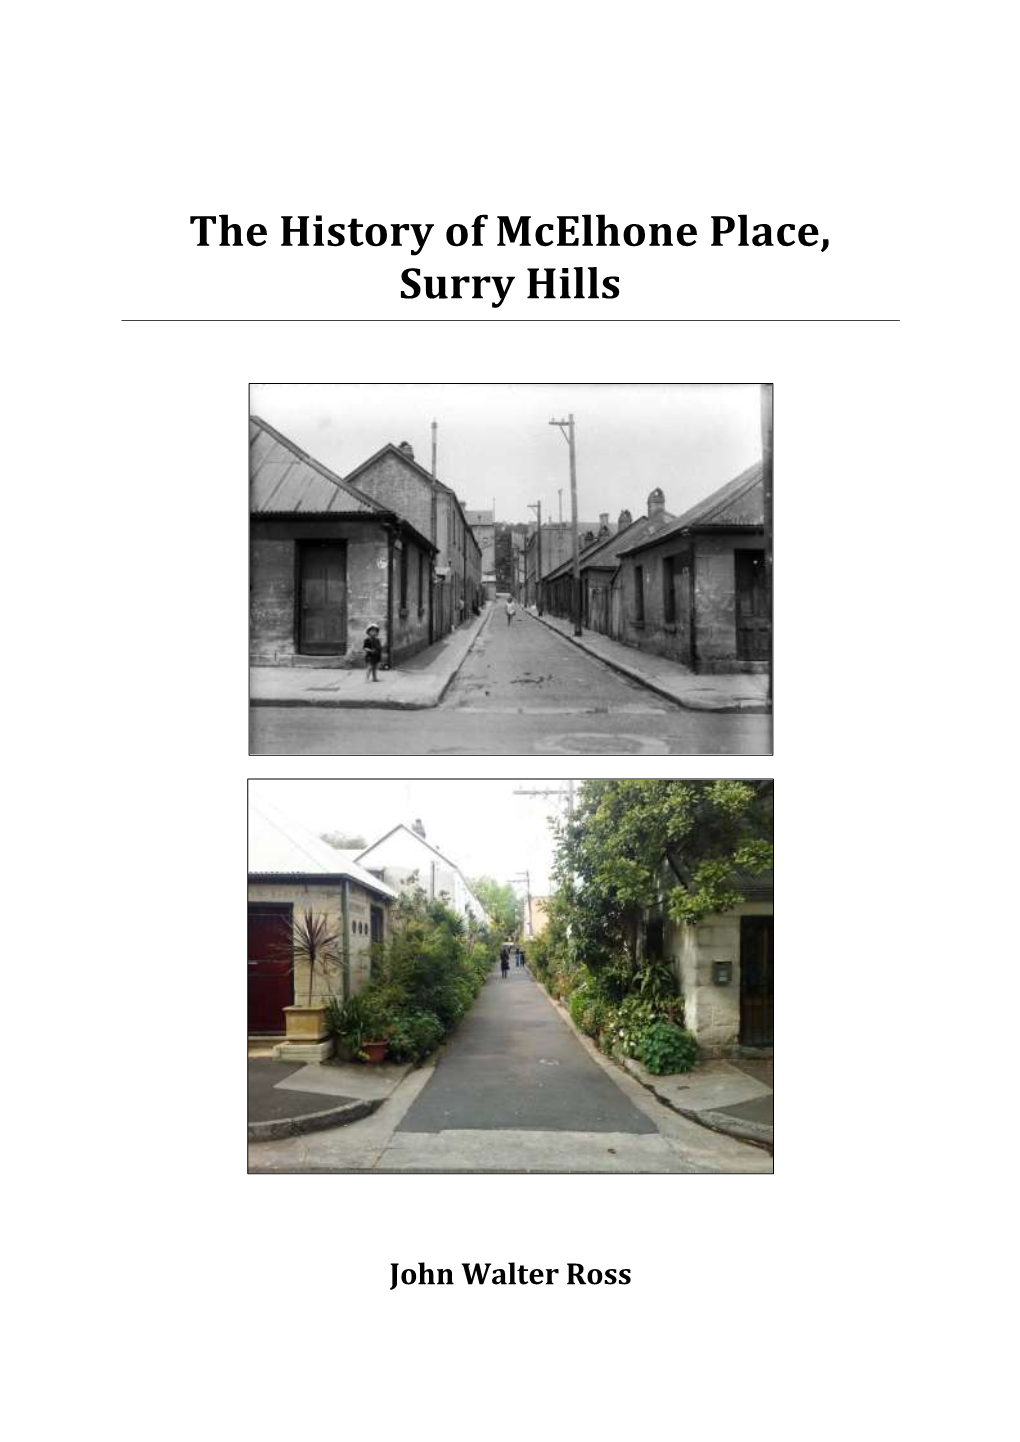 The History of Mcelhone Place, Surry Hills